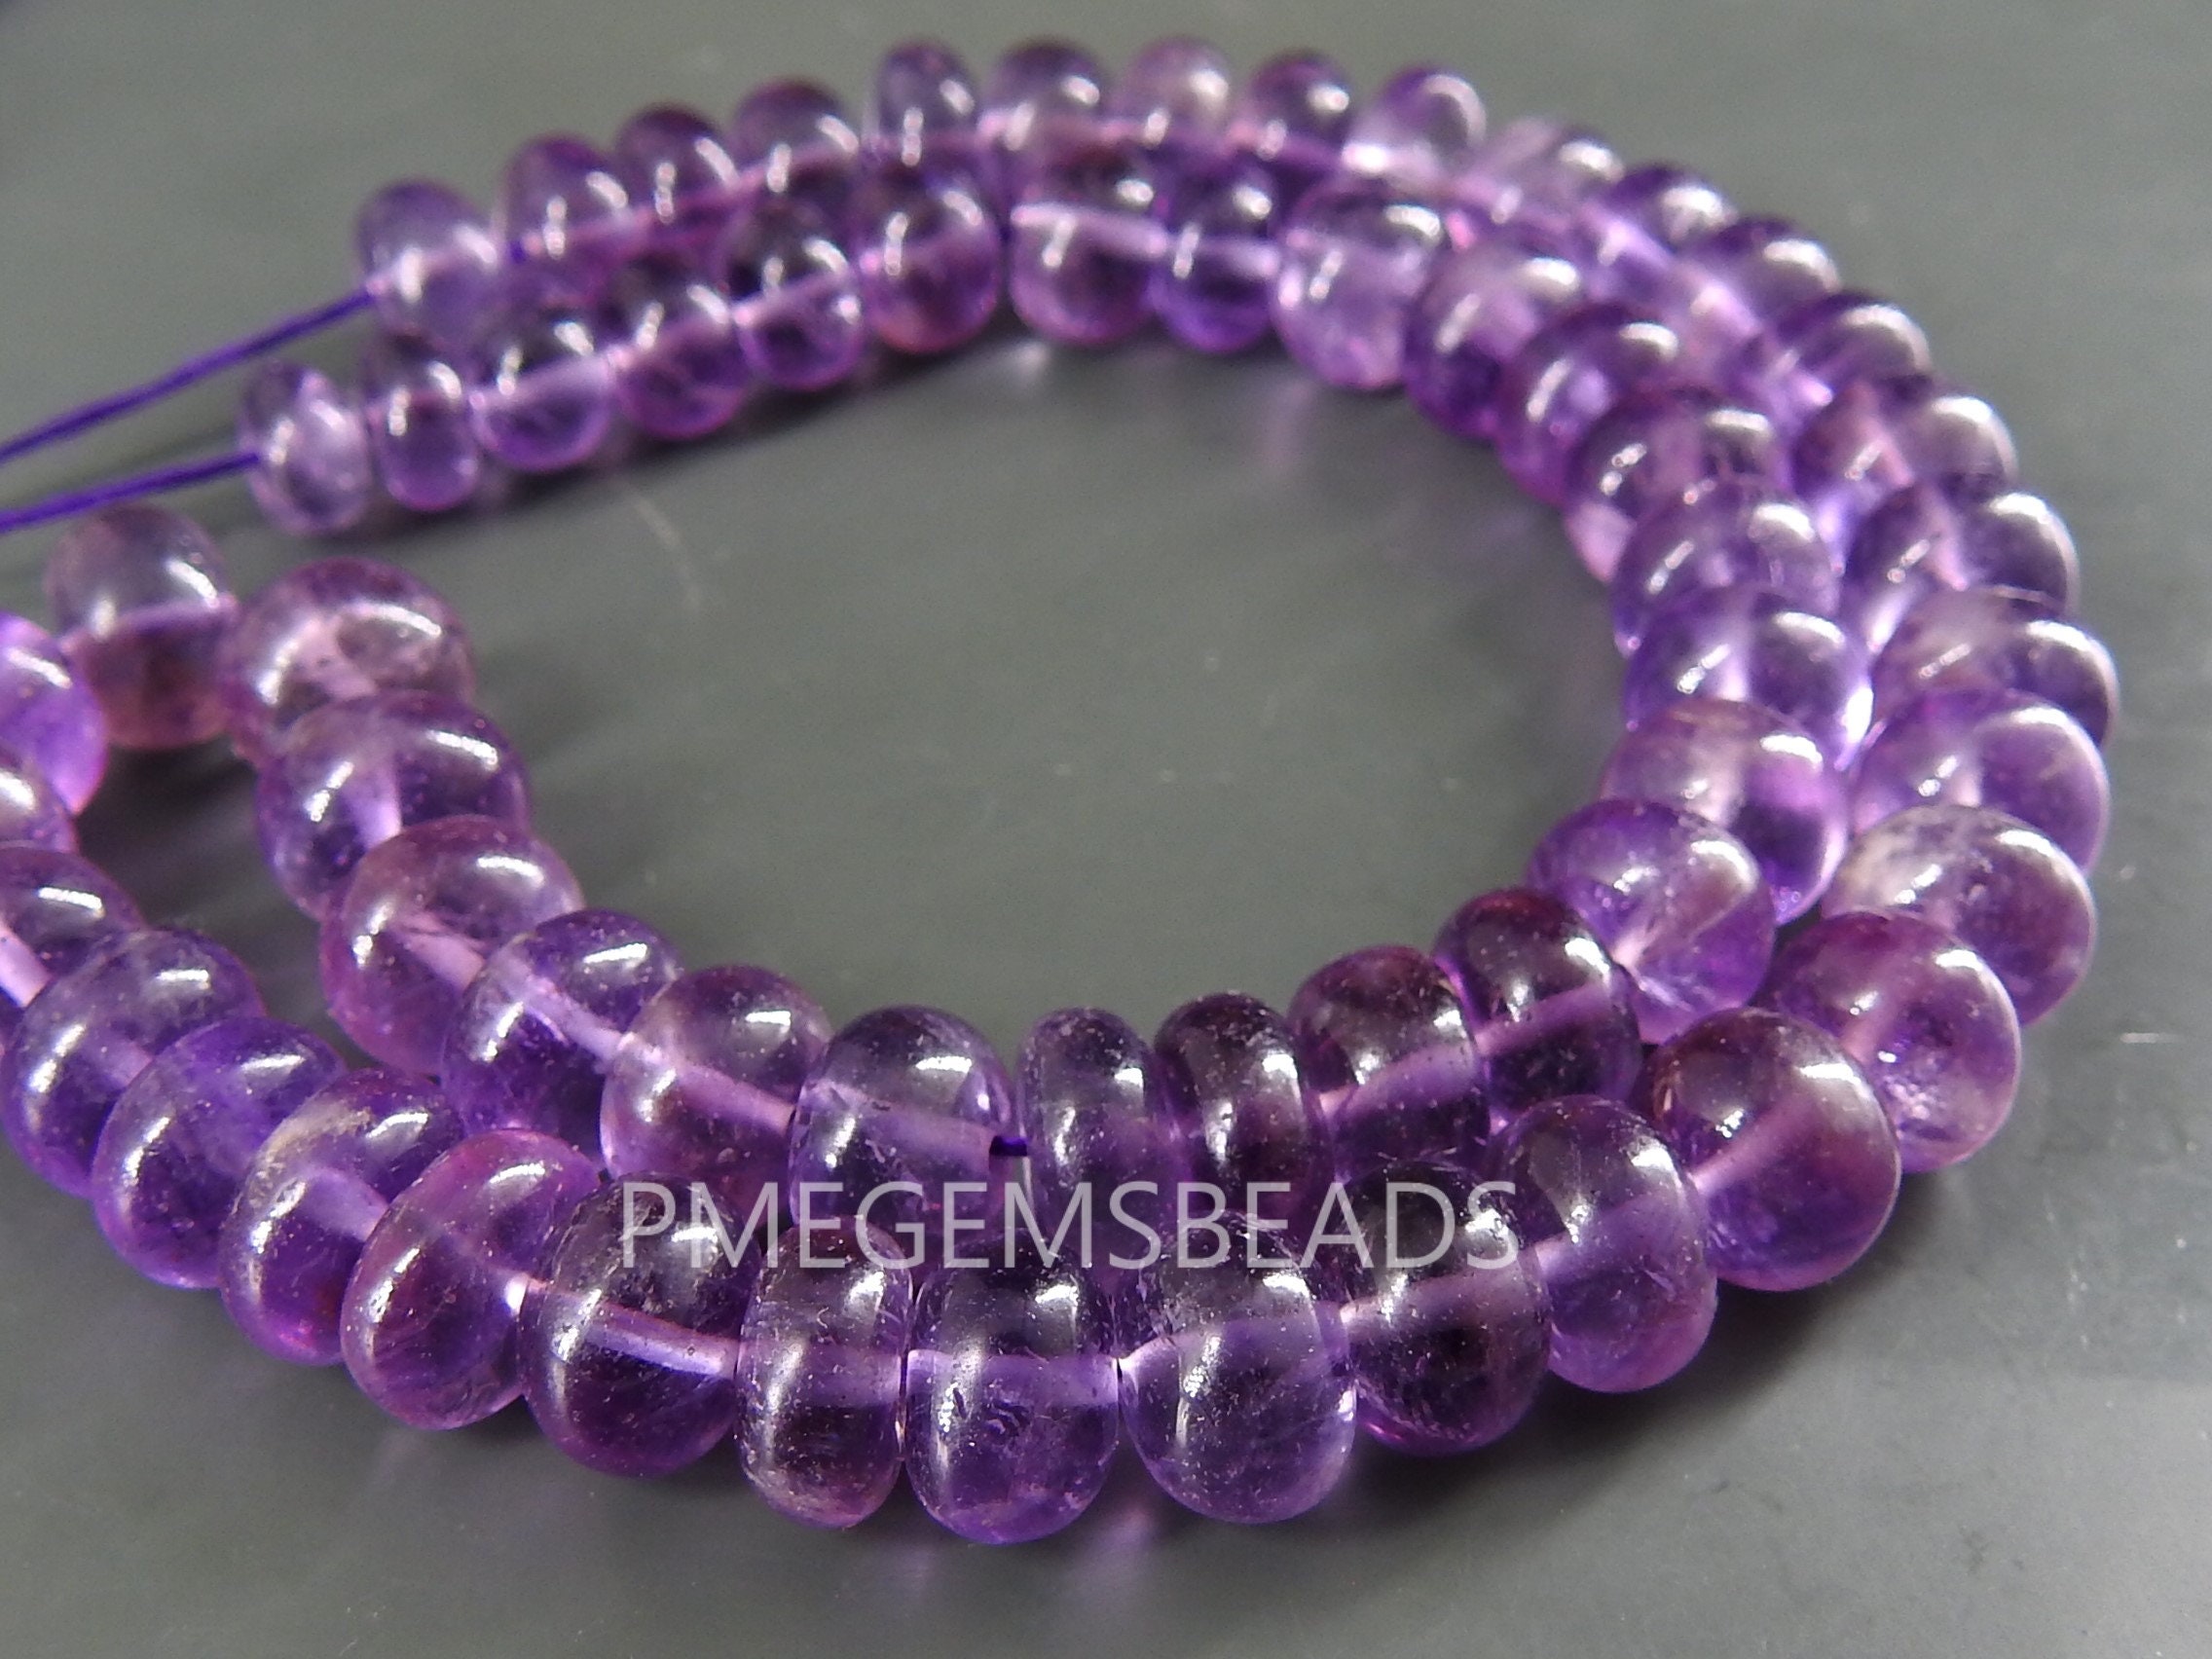 Amethyst Smooth Roundel Beads,Handmade,Loose Stone,For Making Jewelry,Necklace,12Inch Strand,Wholesaler,Supplies,100%Natural PME-B9 | Save 33% - Rajasthan Living 14